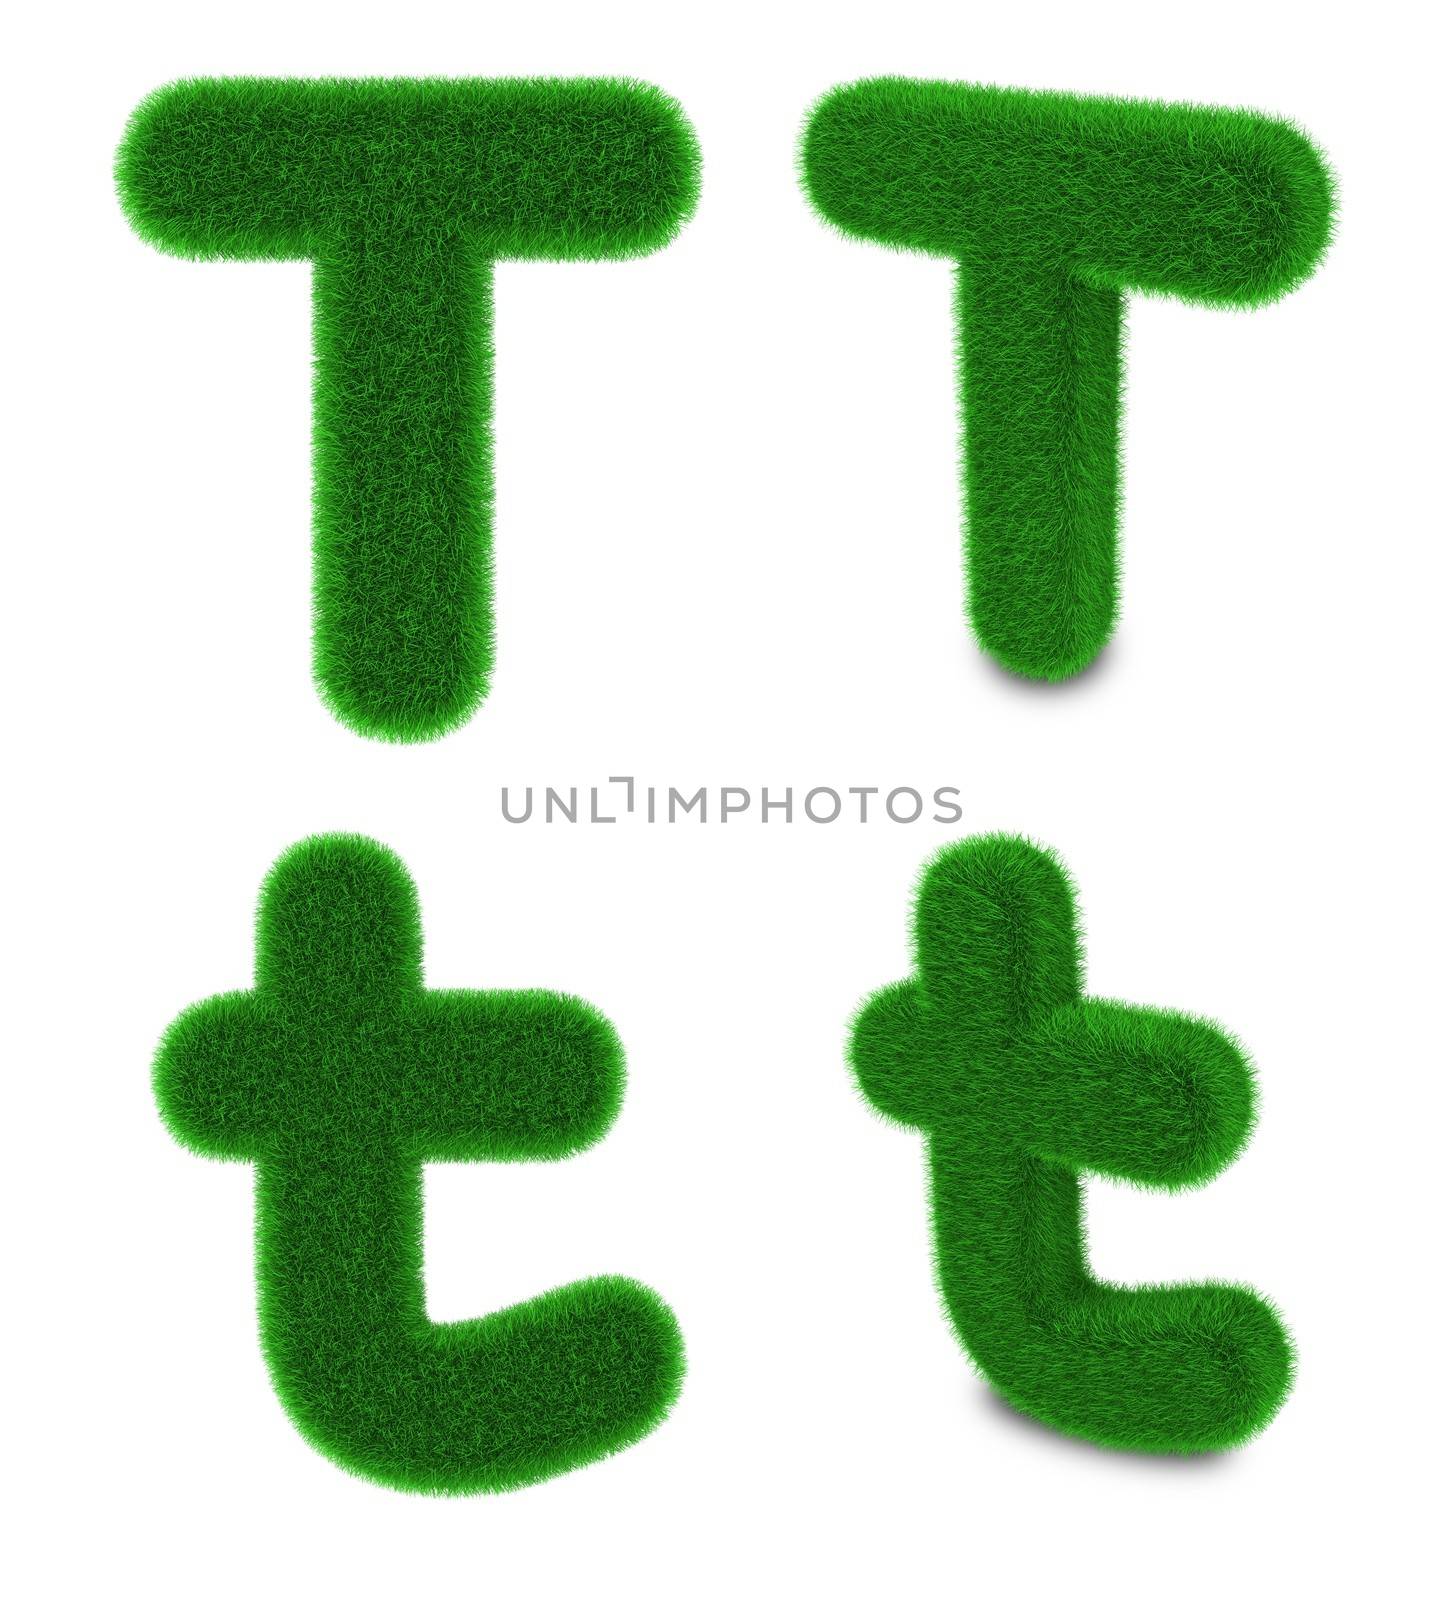 Letter T made of grass by Harvepino